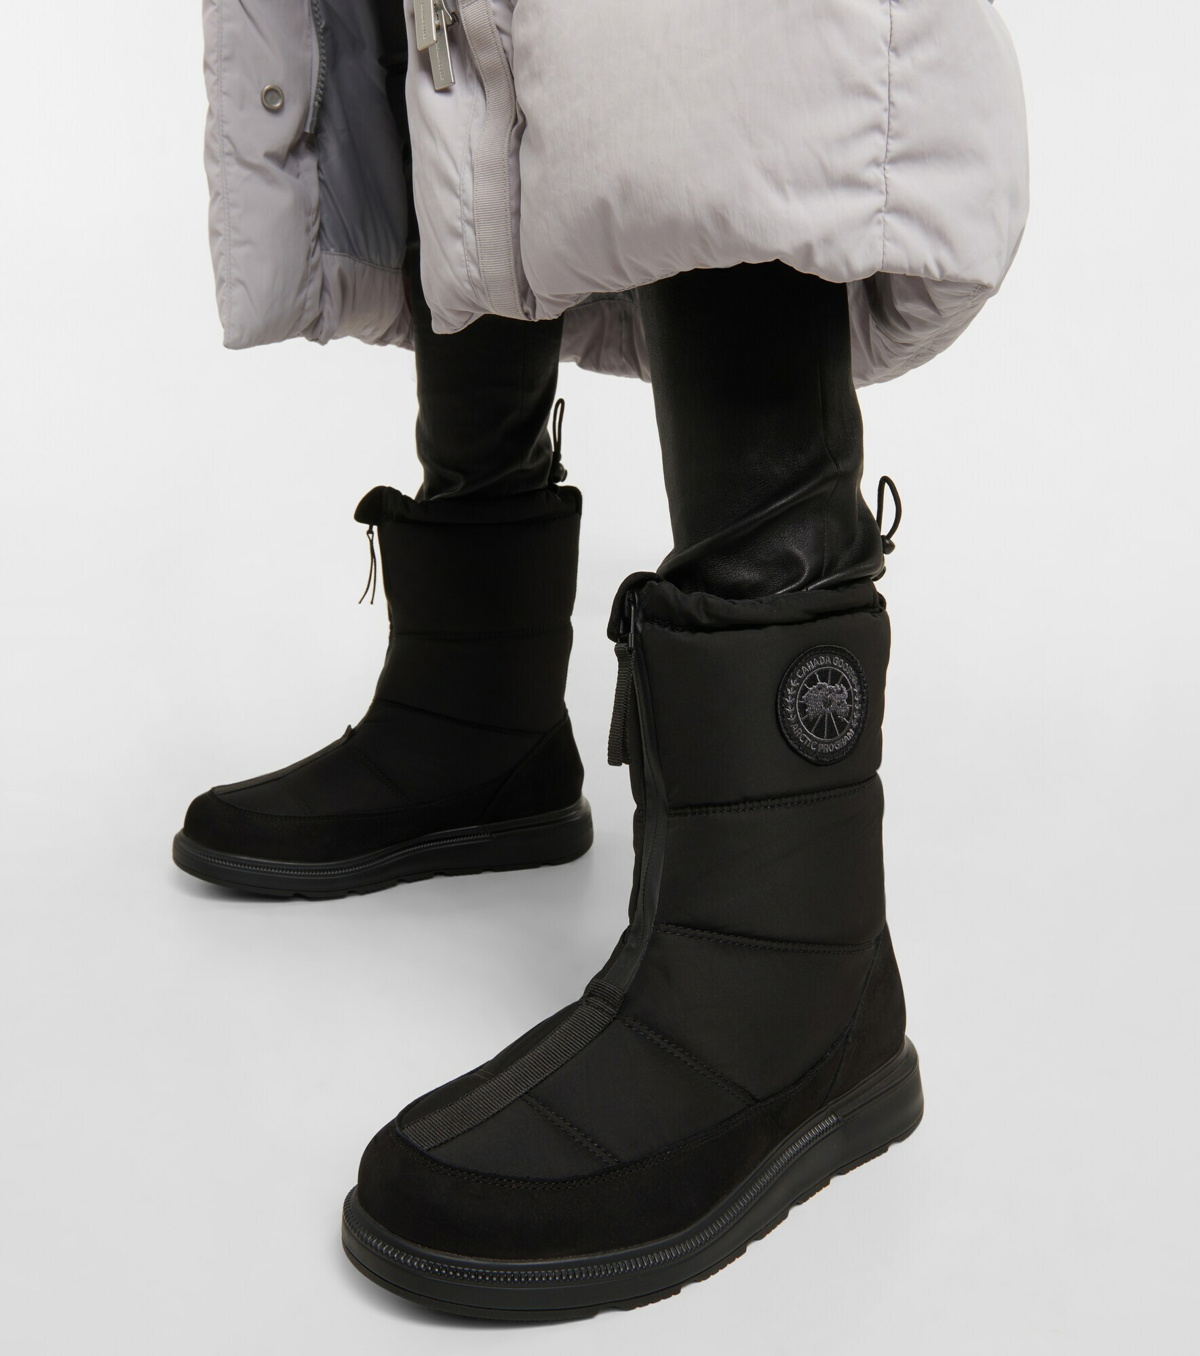 Canada Goose - Cypress fold-down puffer boot Canada Goose